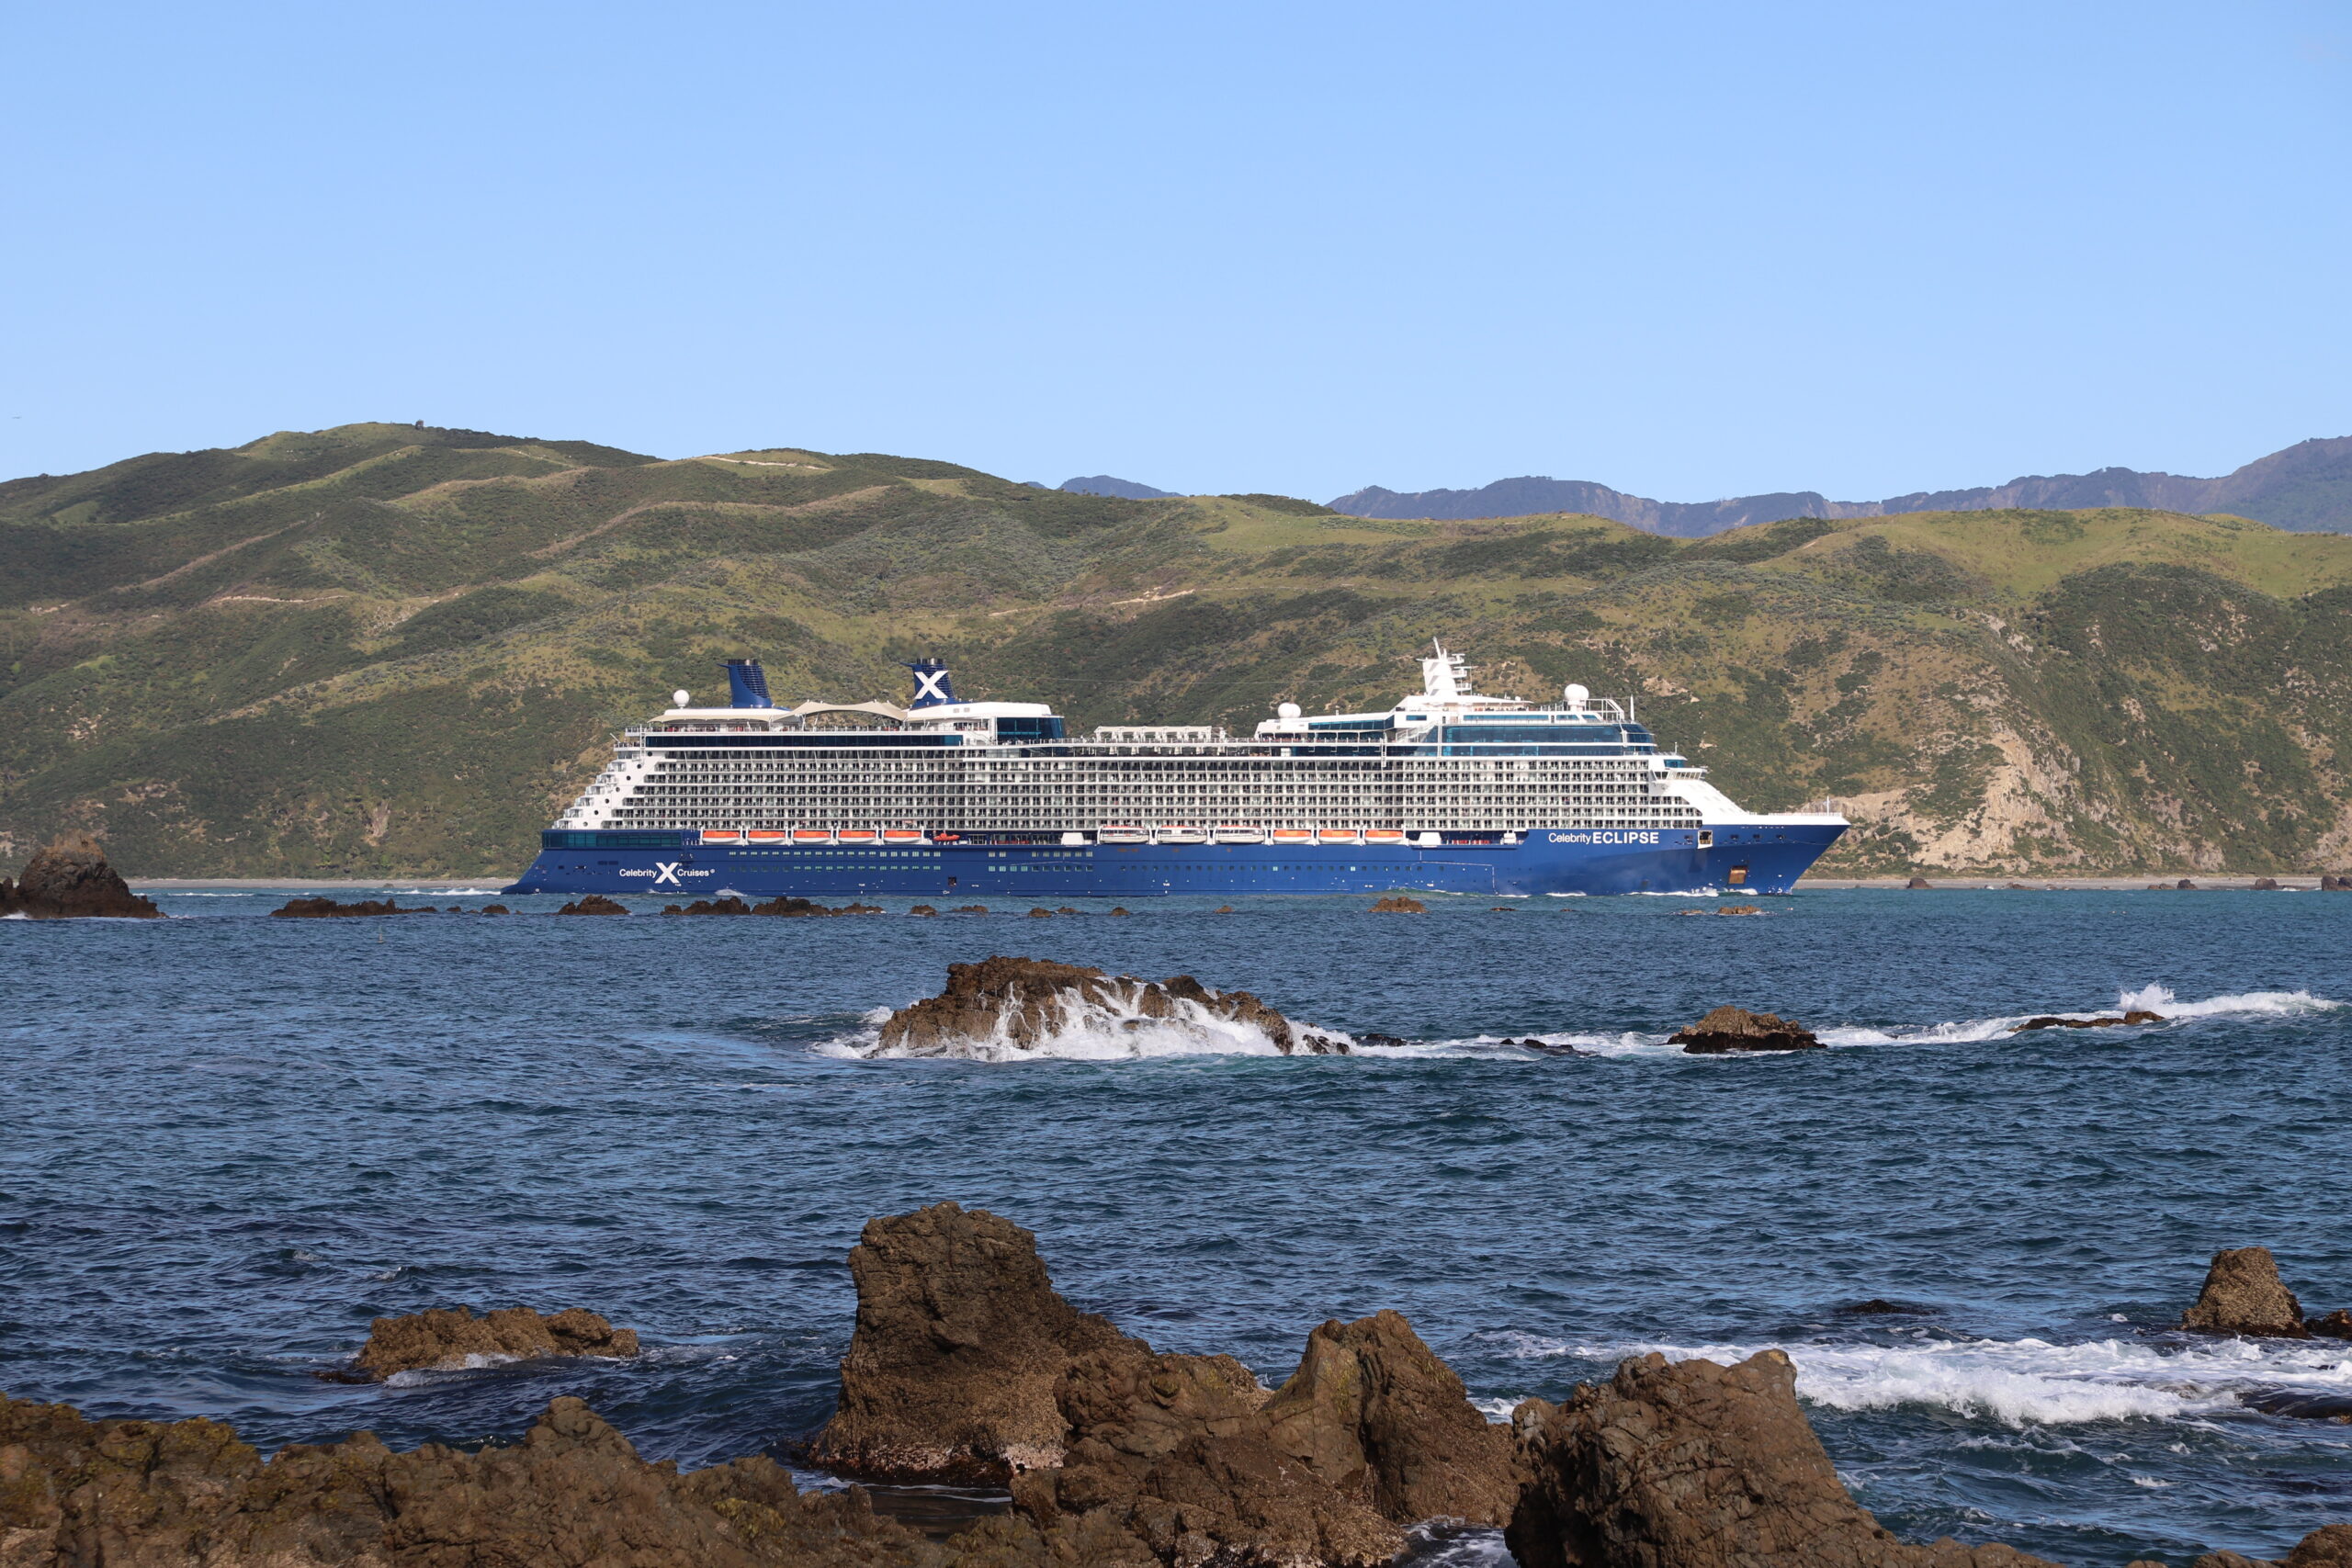 Welcome back to Wellington cruise passengers – it’s great to see you again!